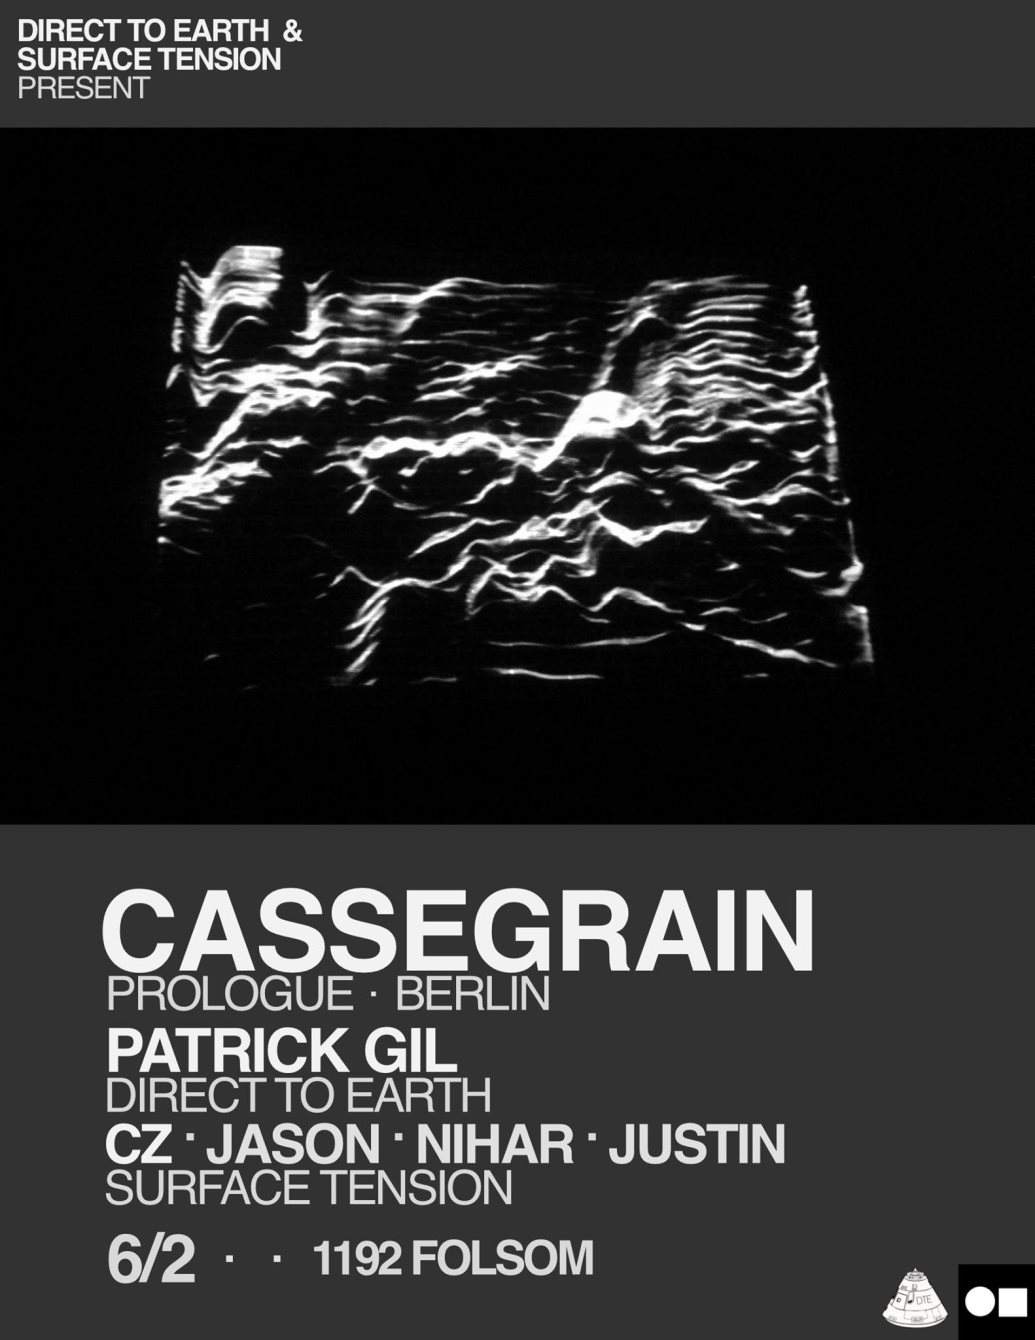 Direct to Earth and Surface Tension with Cassegrain - Página frontal